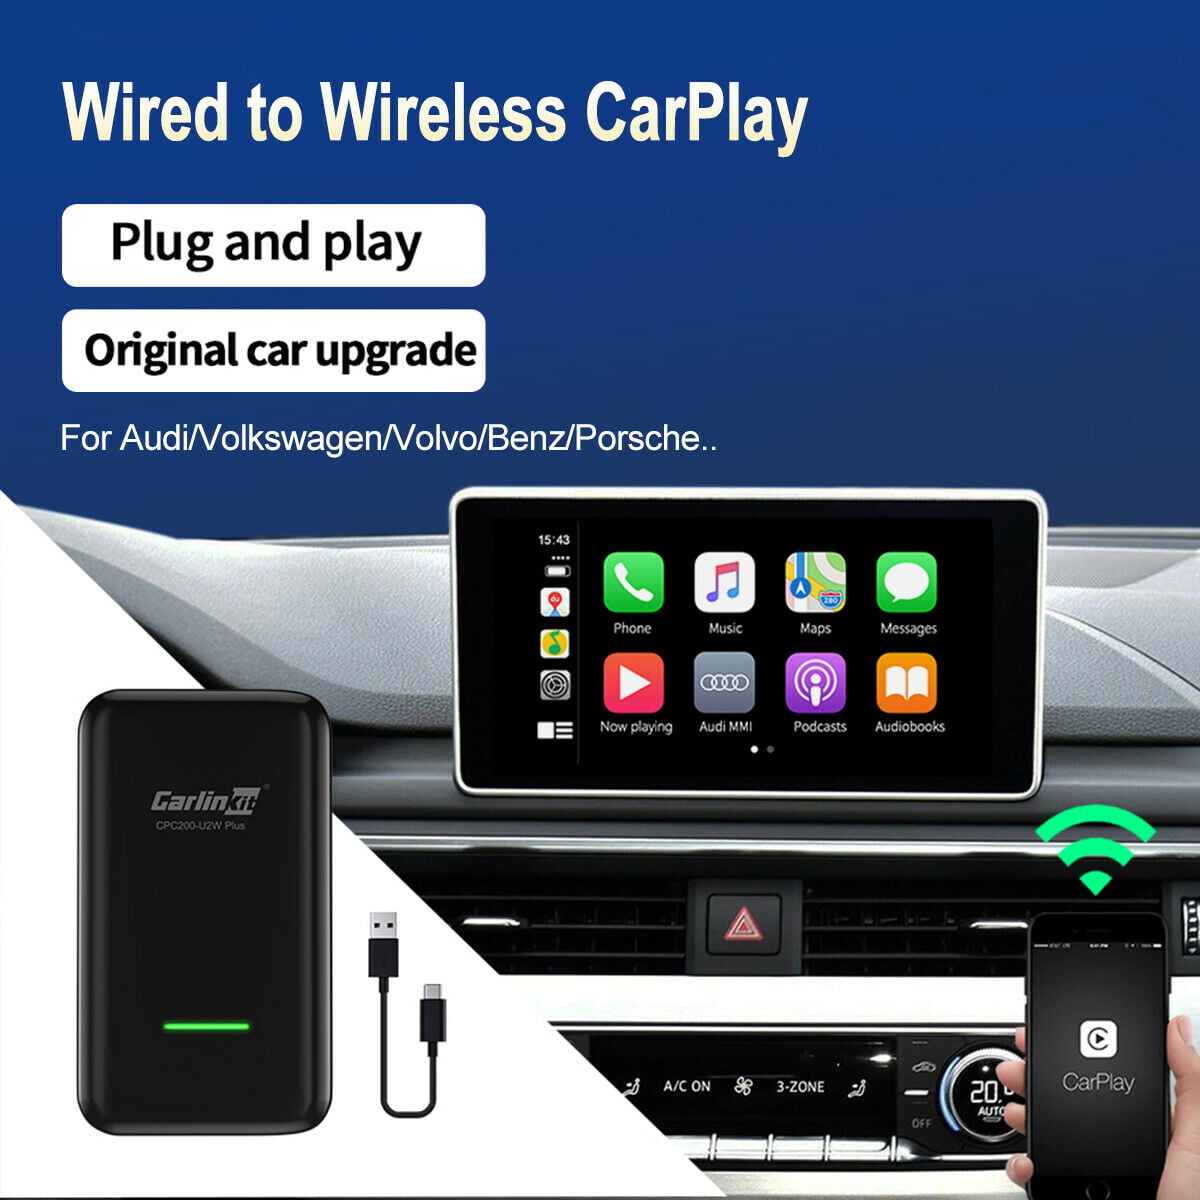 Supports Siri Maps, adapted for Volkswagen Factory CarPlay Cars Carlinkit 2.0 Wired to Wireless Carplay dongle